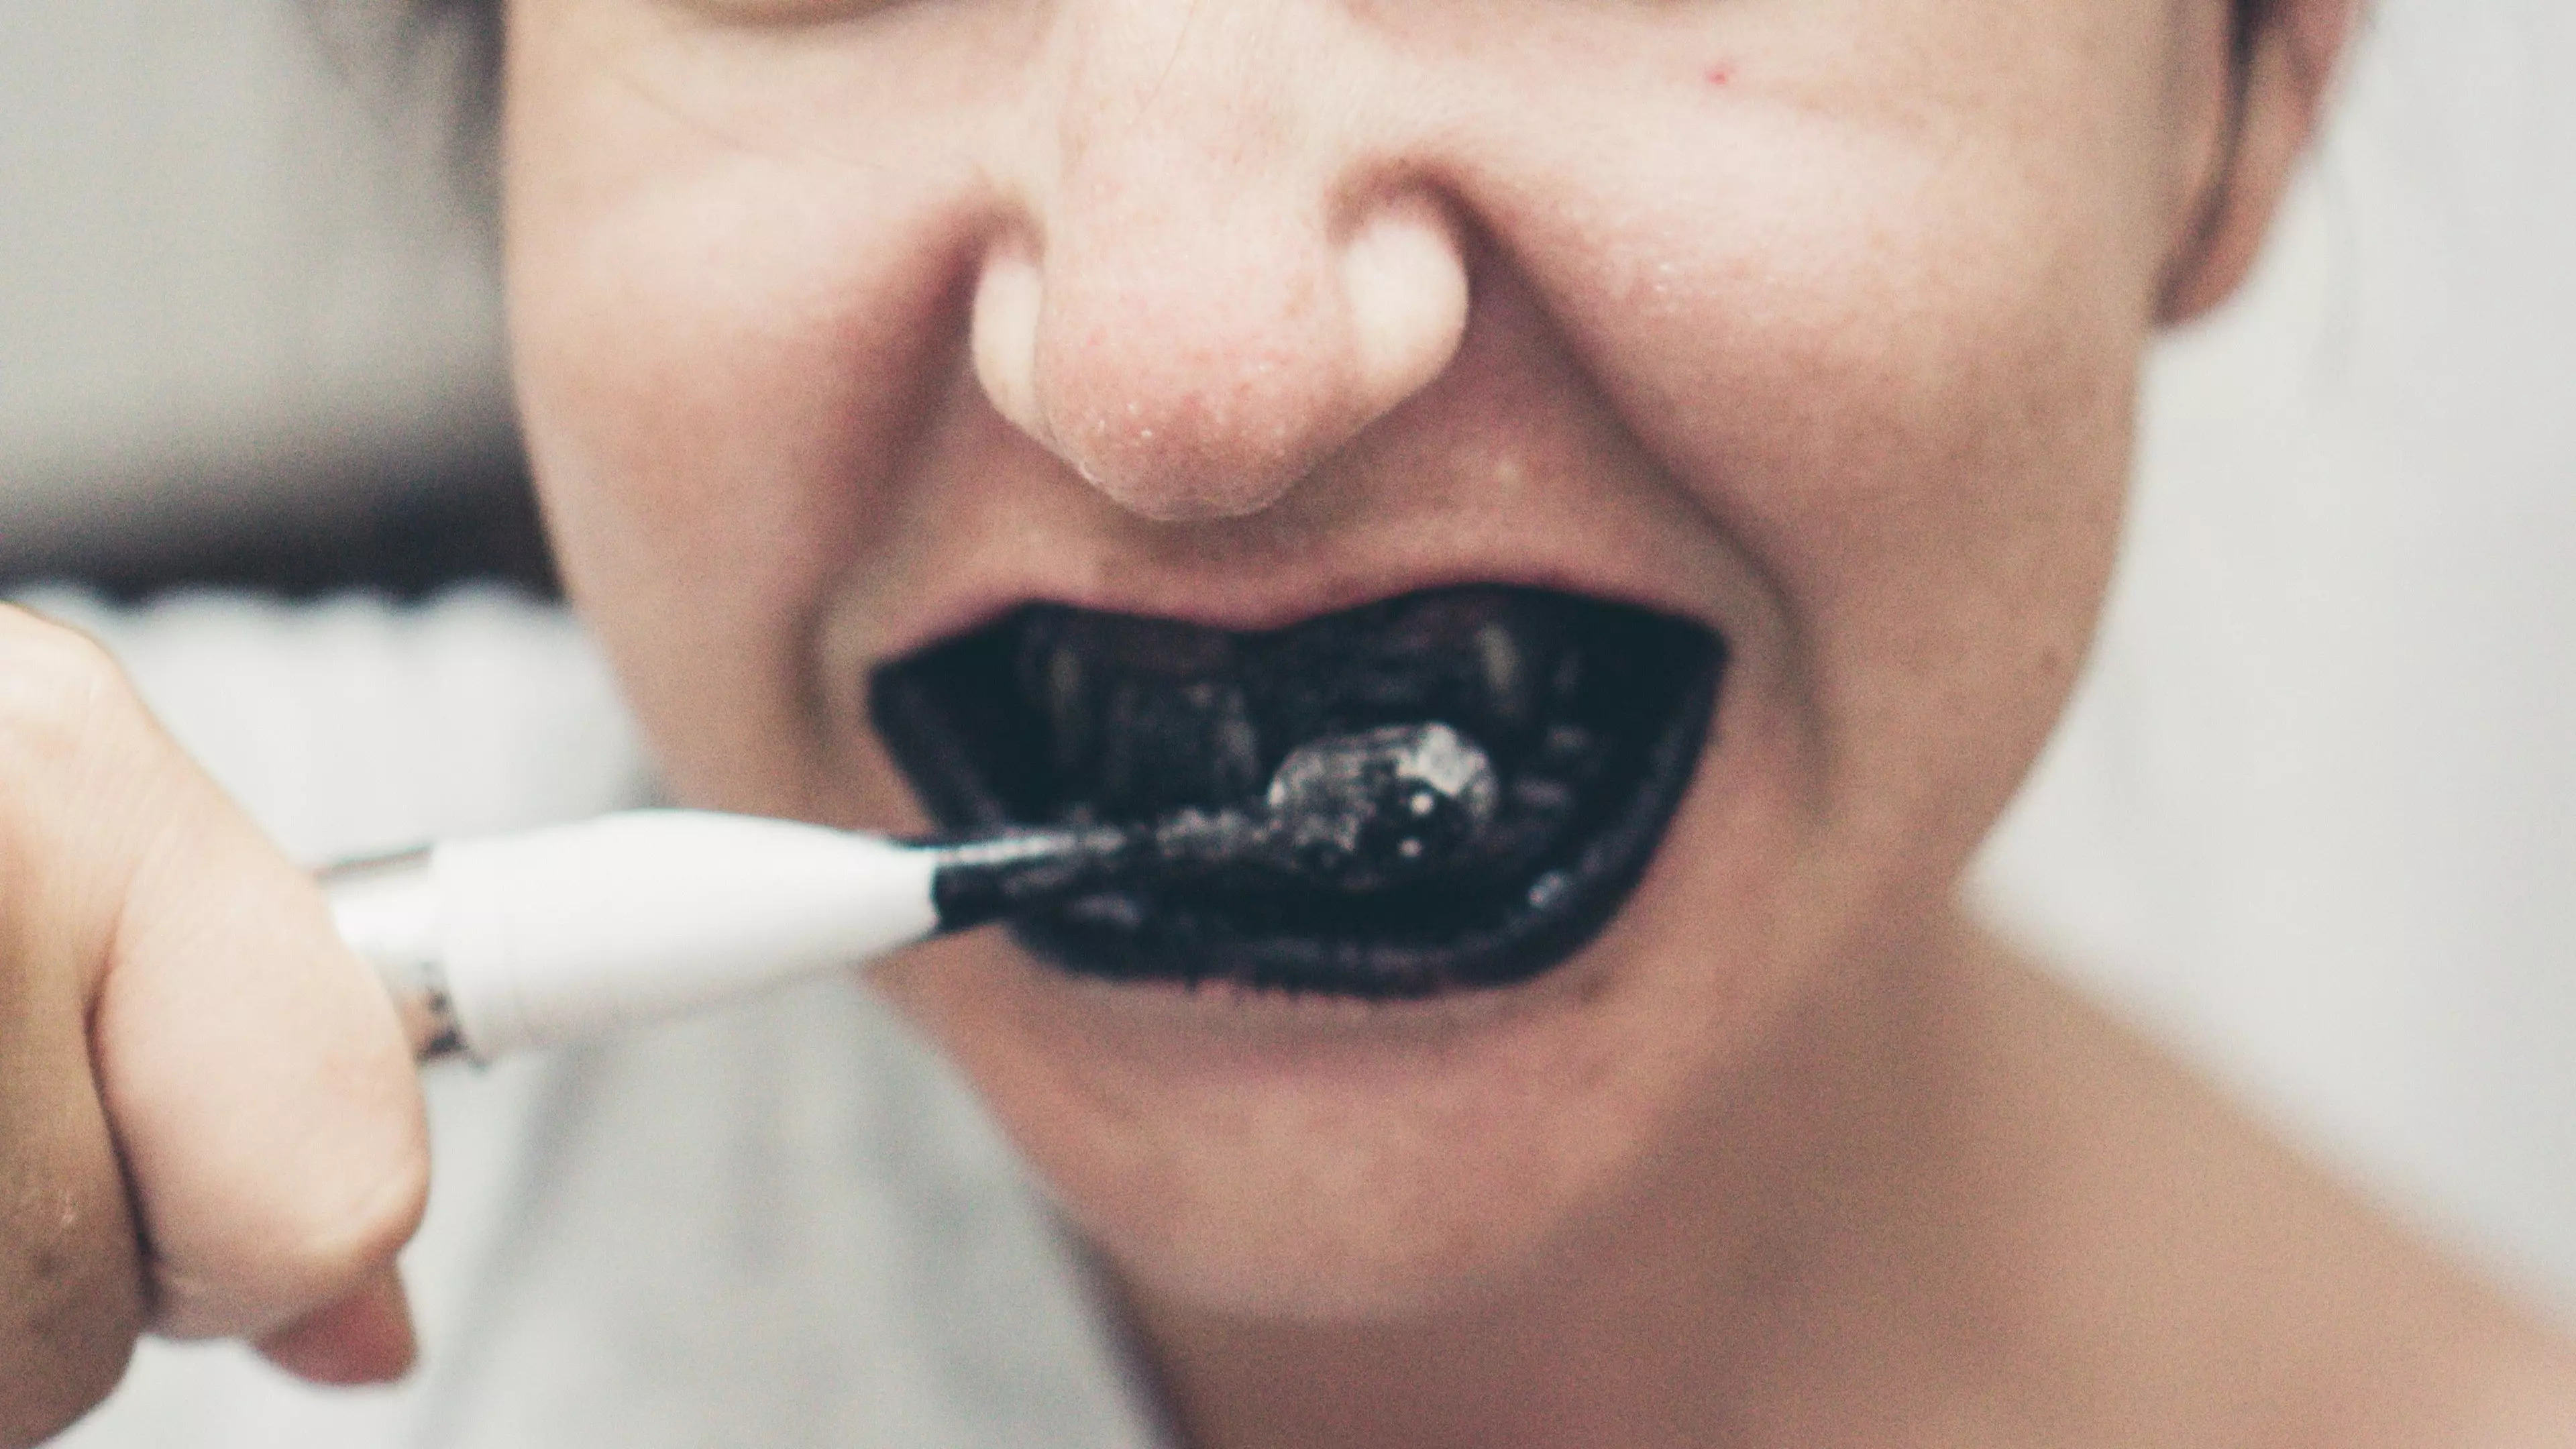 Charcoal Toothpaste Doesn't Whiten Your Teeth, Say Experts